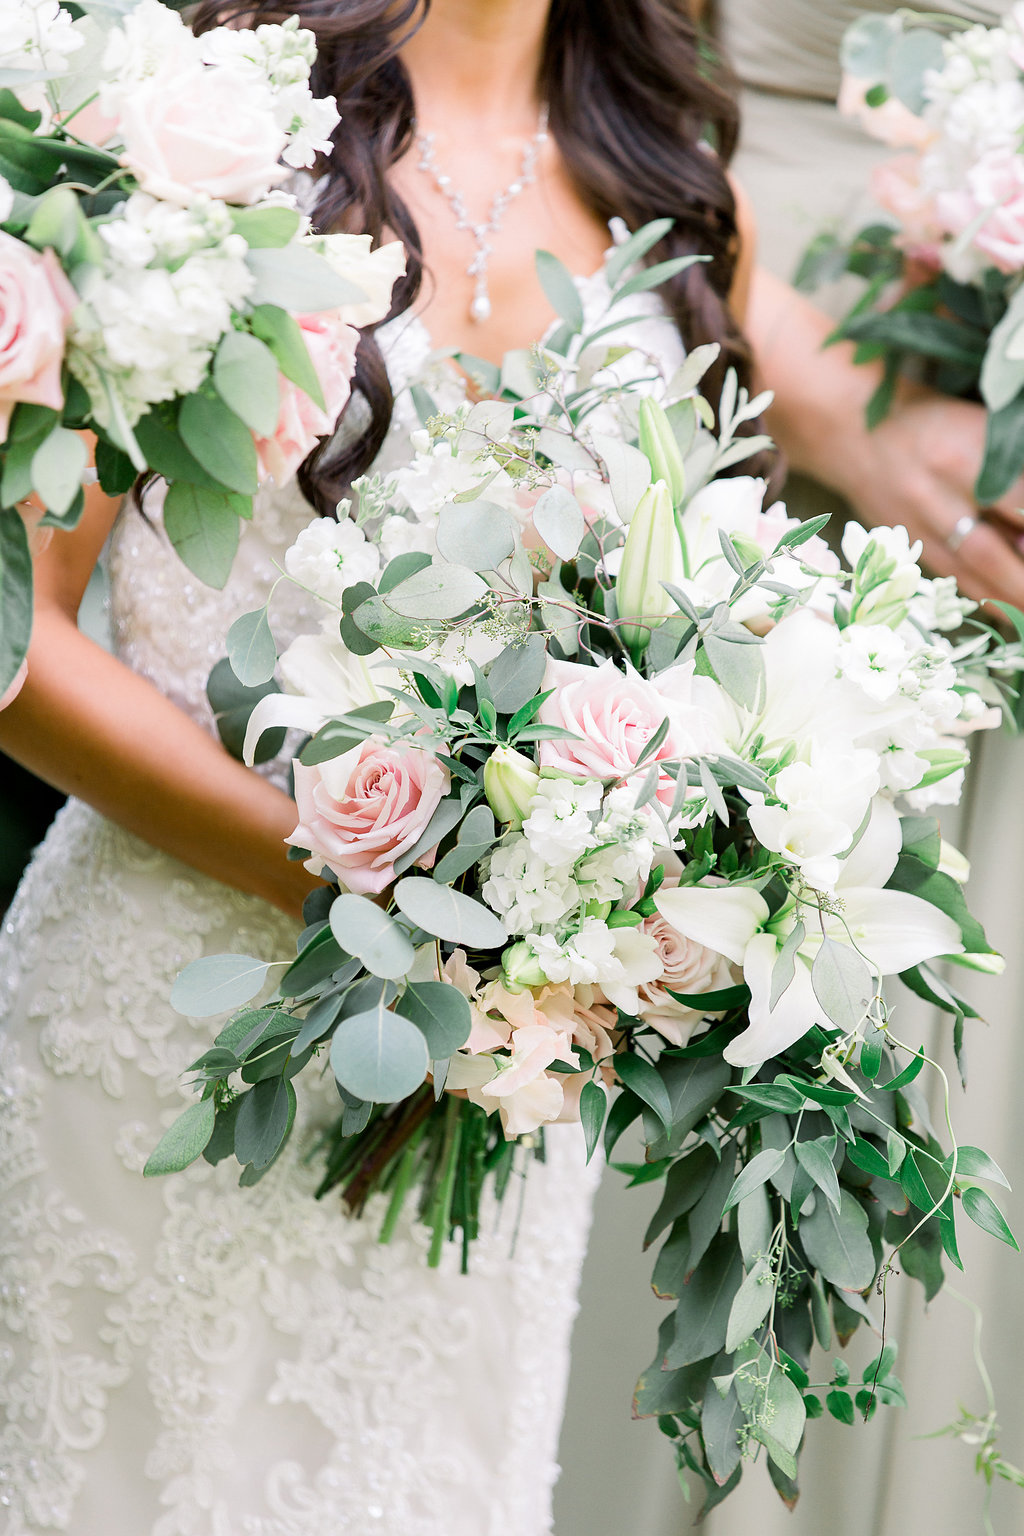 Bridal Bouquet in soft Blush and White with lots of lush foliage.